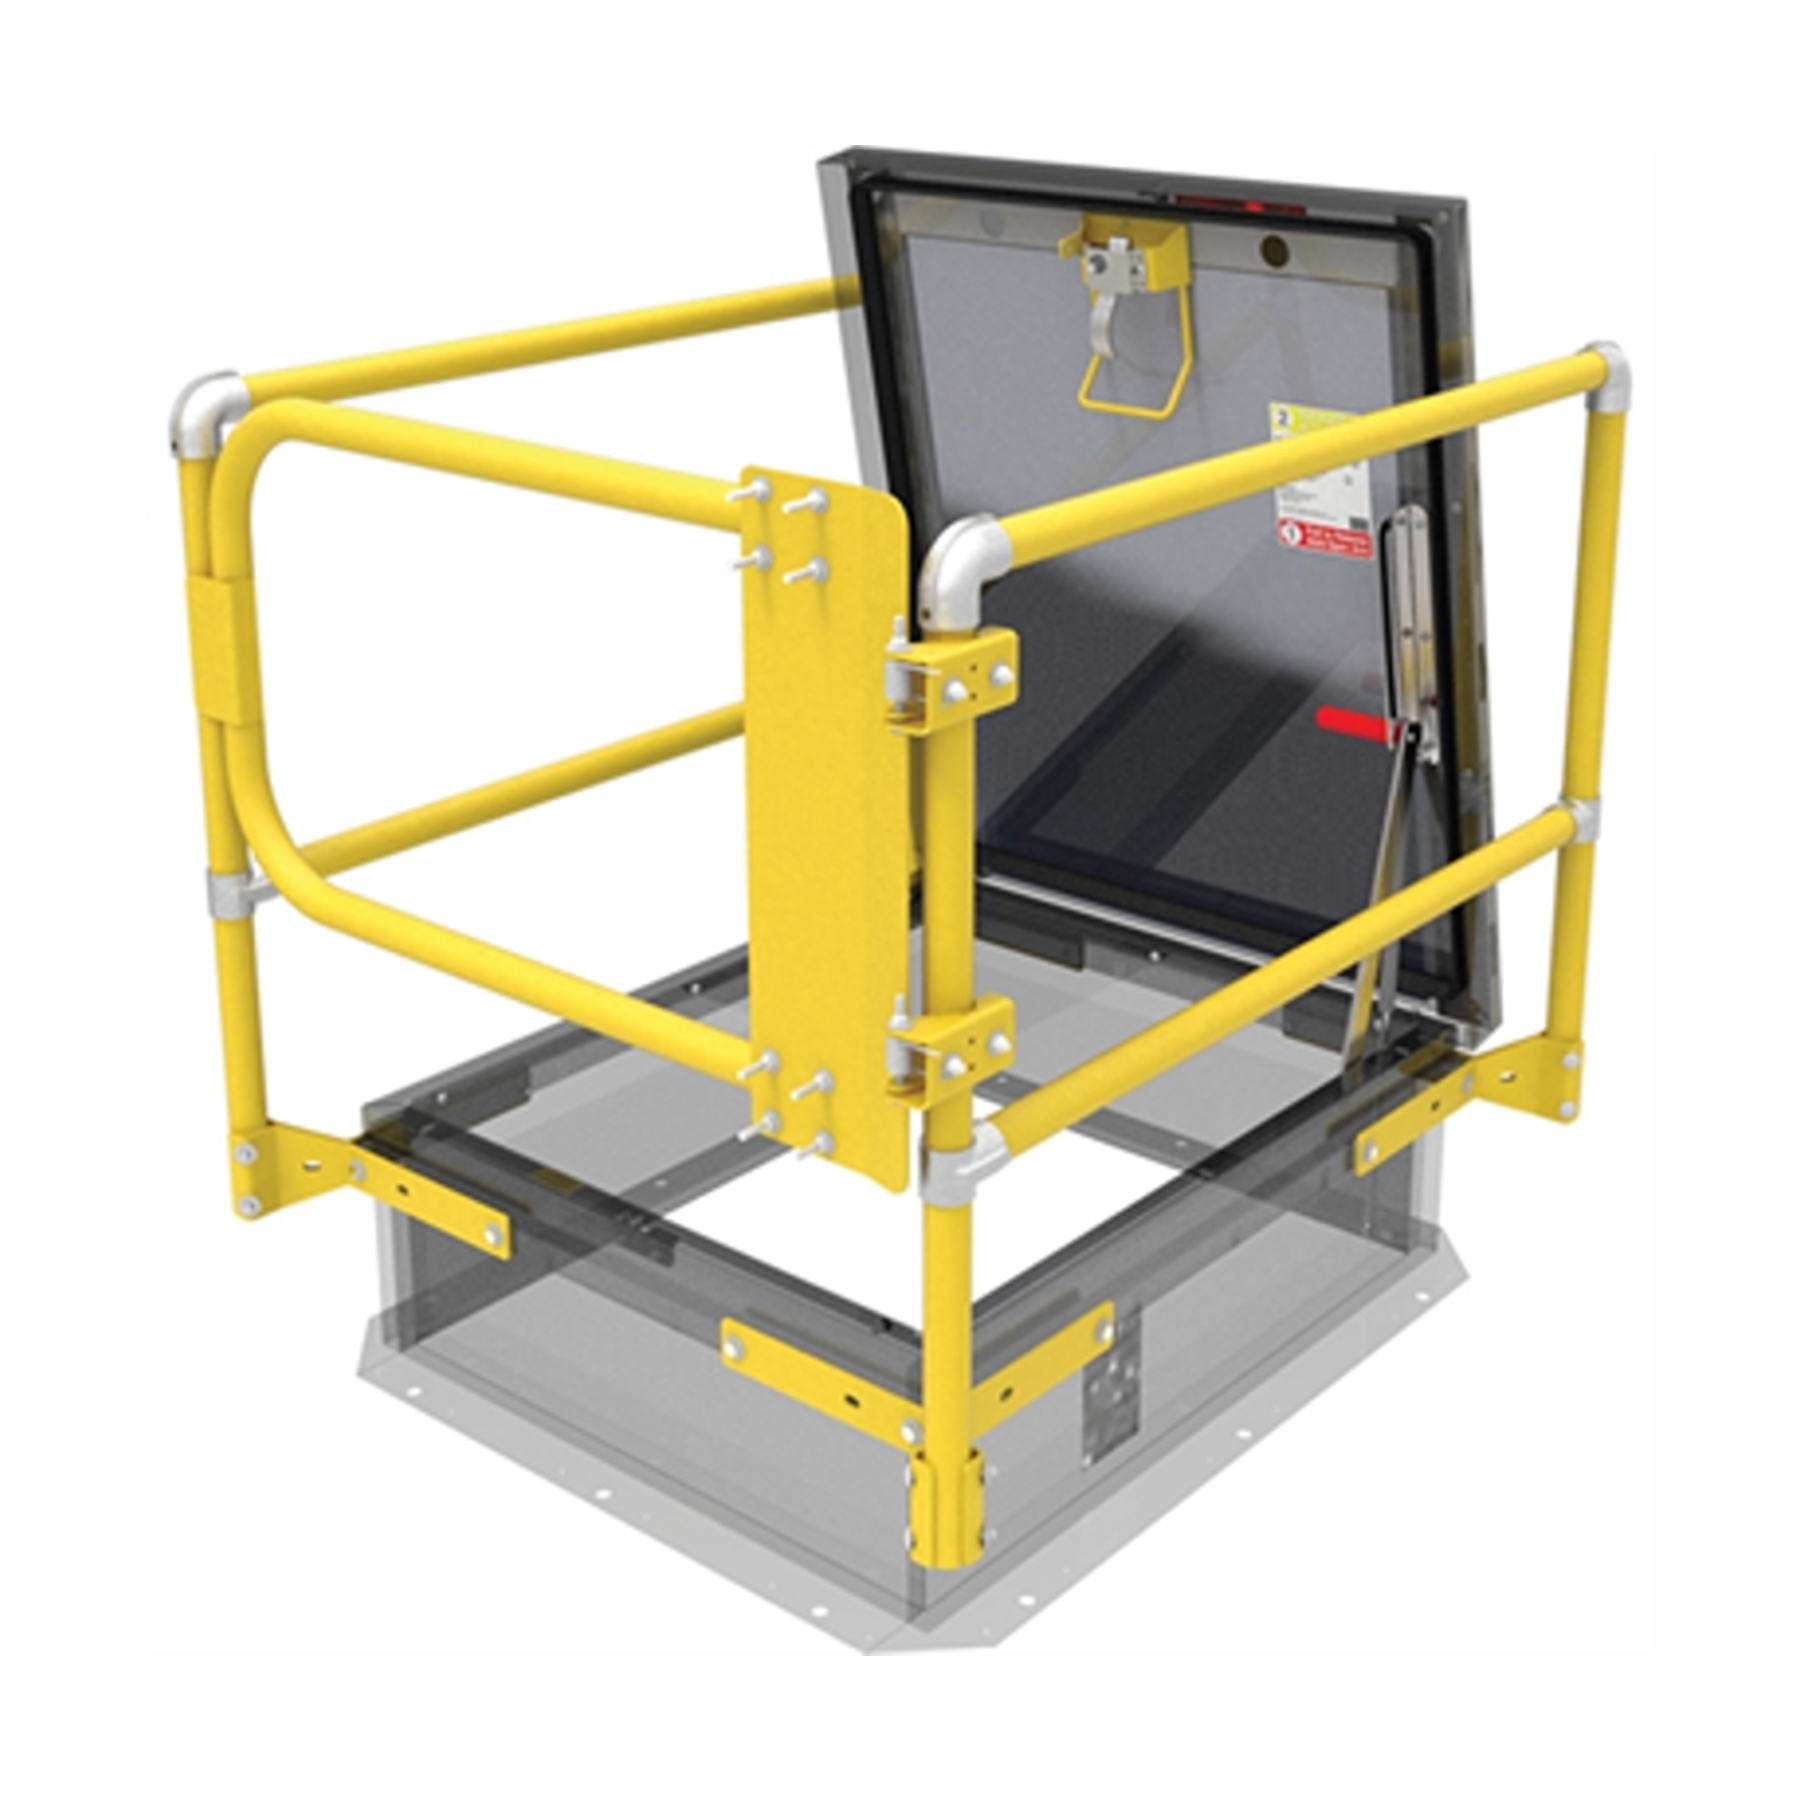 COMMERCIAL ACCESS SAFETY RAILINGS & ROOF HATCH SAFETY RAILINGS - ONTARIO COMMERCIAL DOORS